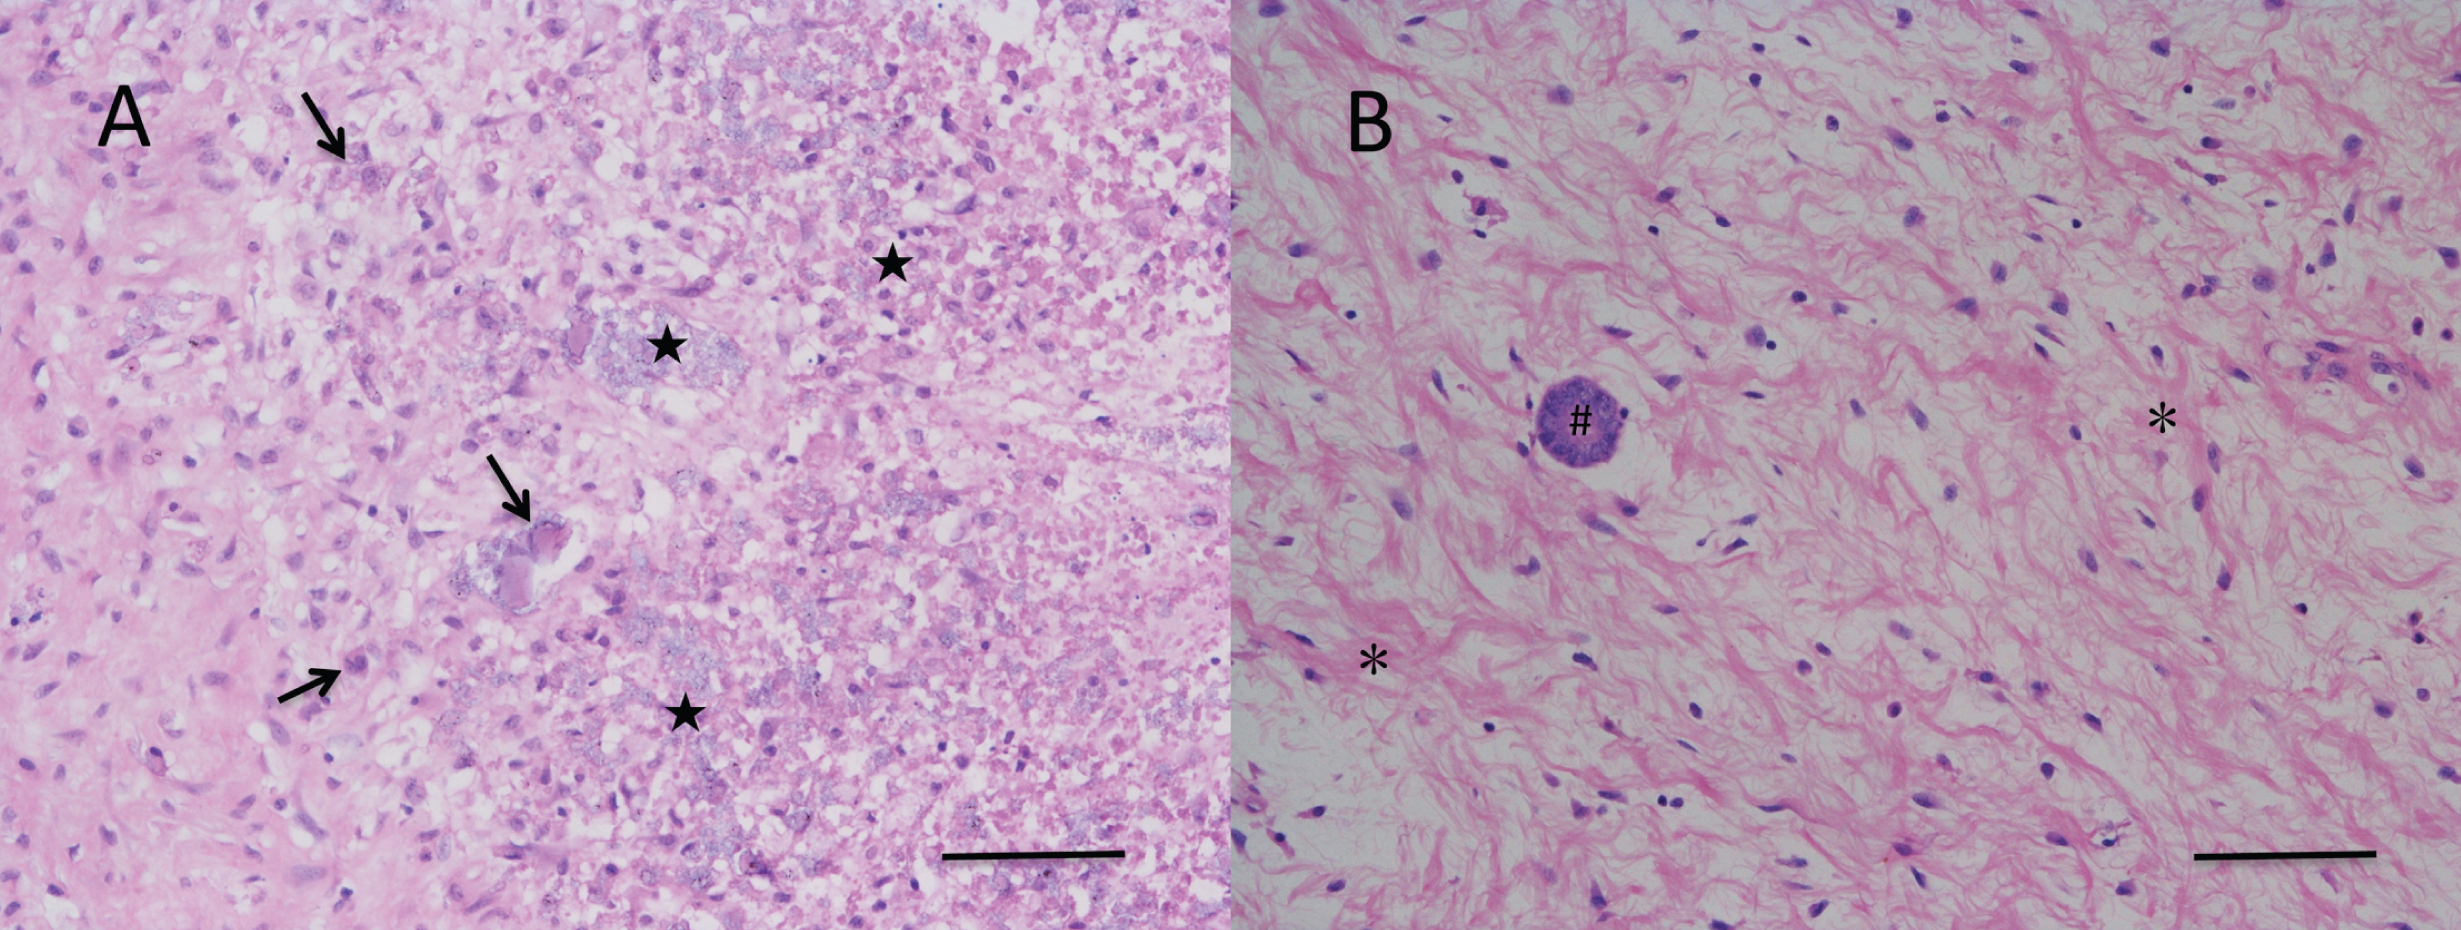 Histopathology of the tumor in right kidney, intravenous and right atrium embolus. (A), Patchy necrosis (★) and atypical tumor cells (arrow) were observed in intravenous and right atrium tumor embolus; (B) Kidney tubules (#), hyperplasia of spindle cell (*) but no anaplasia was found in kidney post-chemotherapy. (HE stain, bar = 100 μm).